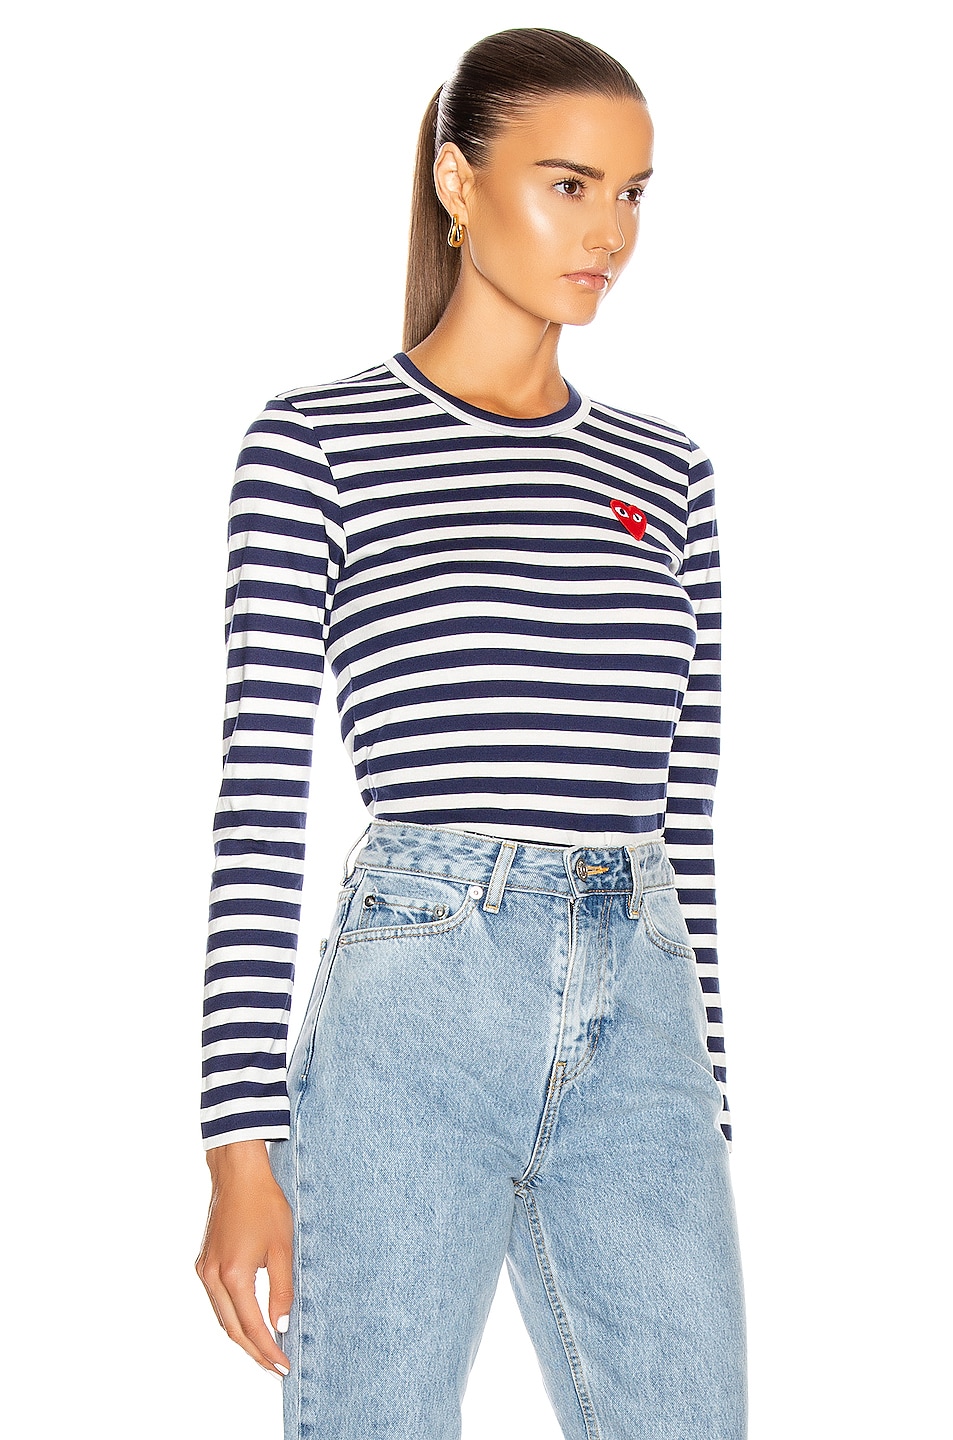 COMME des GARCONS PLAY Stripe Red Heart Tee in Navy | FWRD